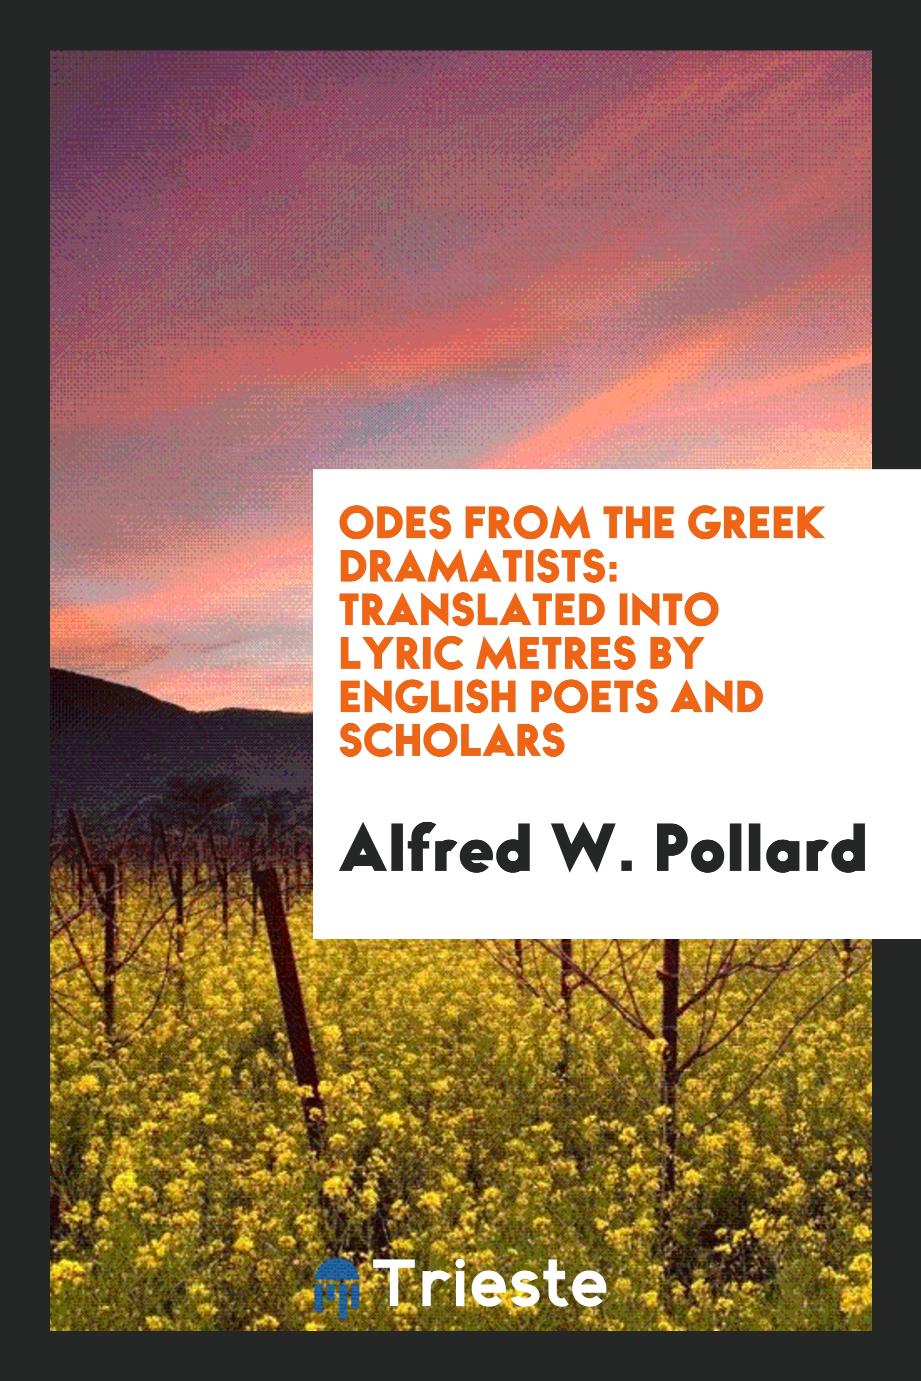 Odes from the Greek Dramatists: Translated into Lyric Metres by English Poets and Scholars